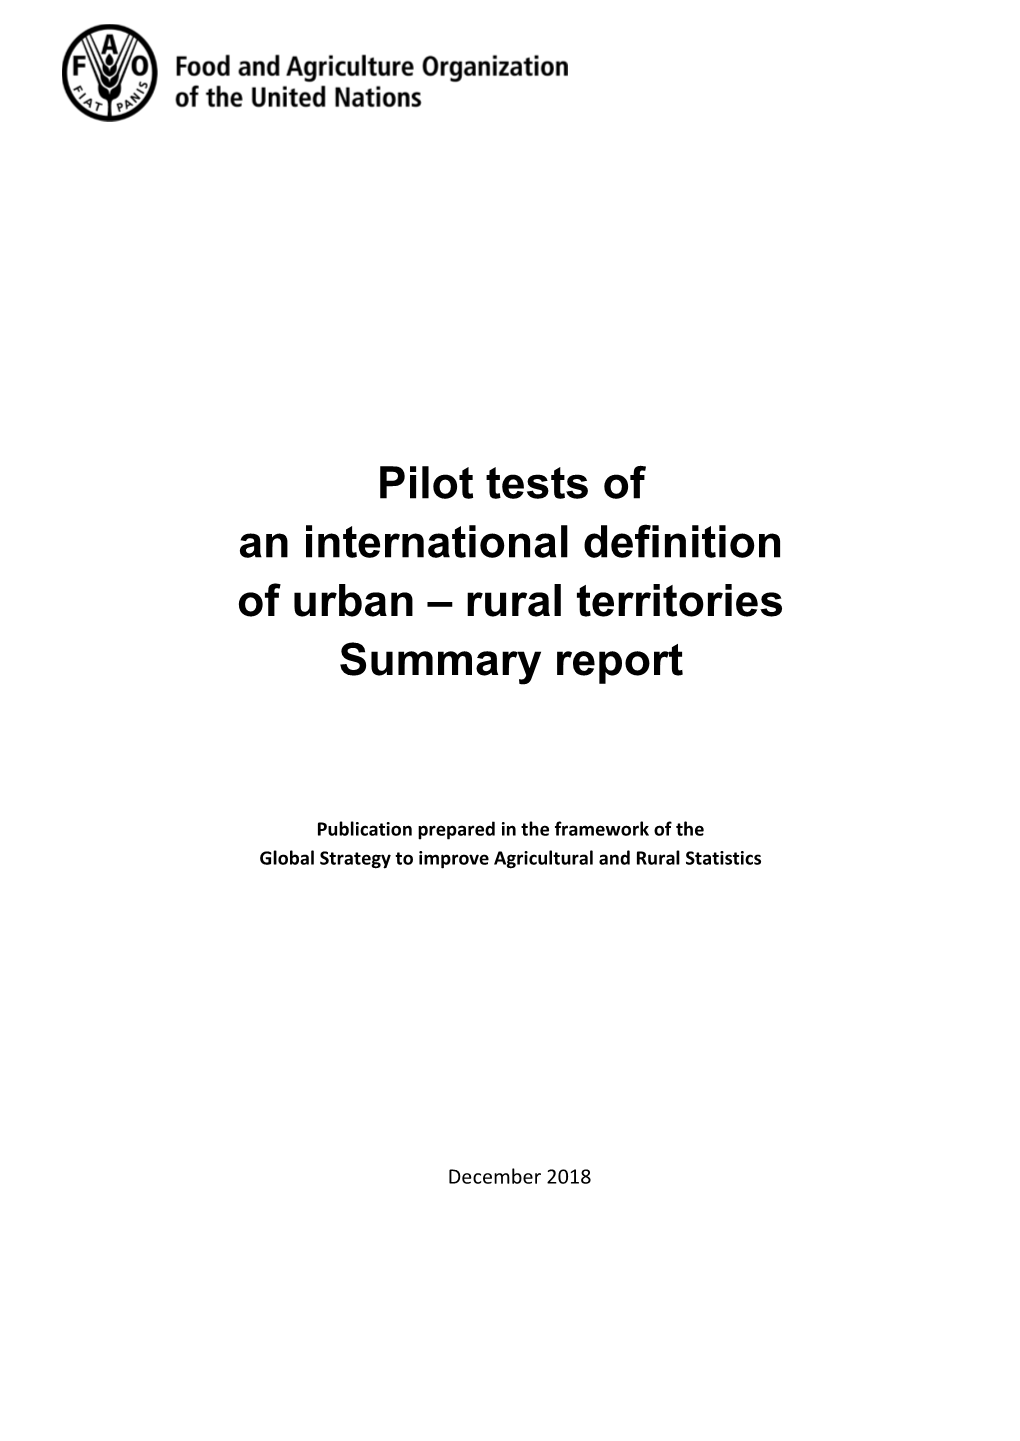 Pilot Tests of an International Definition of Urban – Rural Territories Summary Report